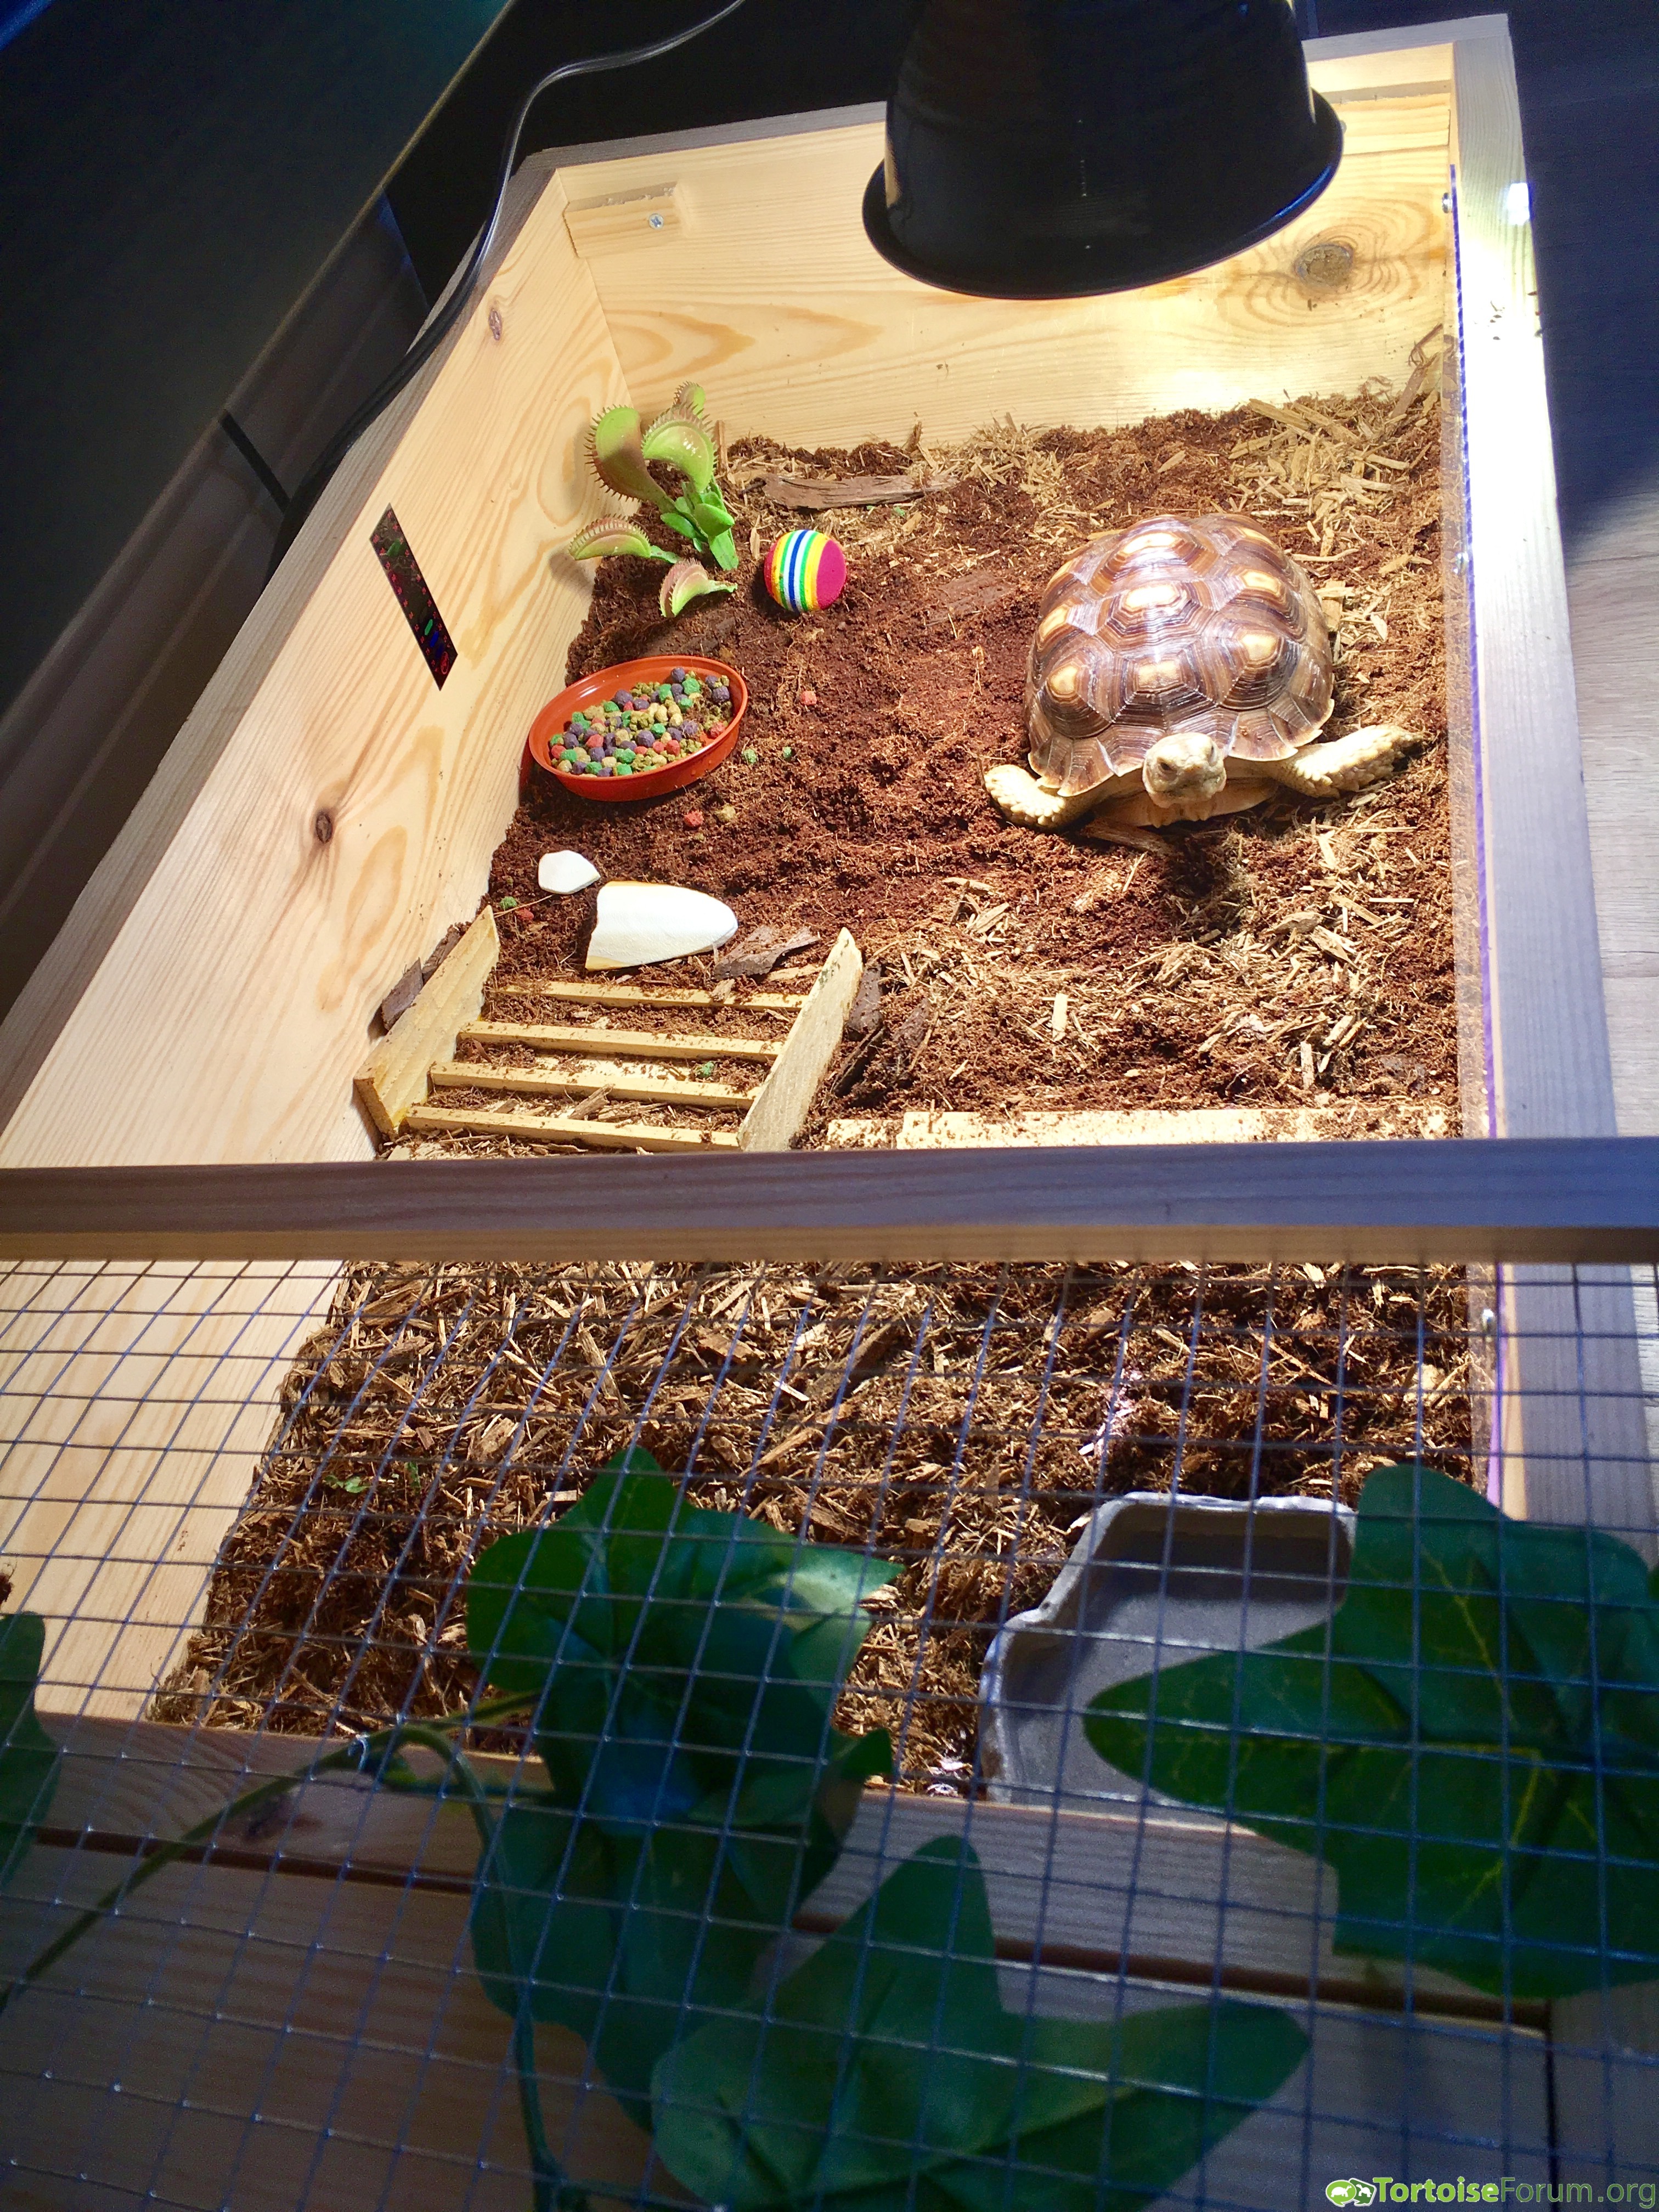 Thor's temporary indoor home:)